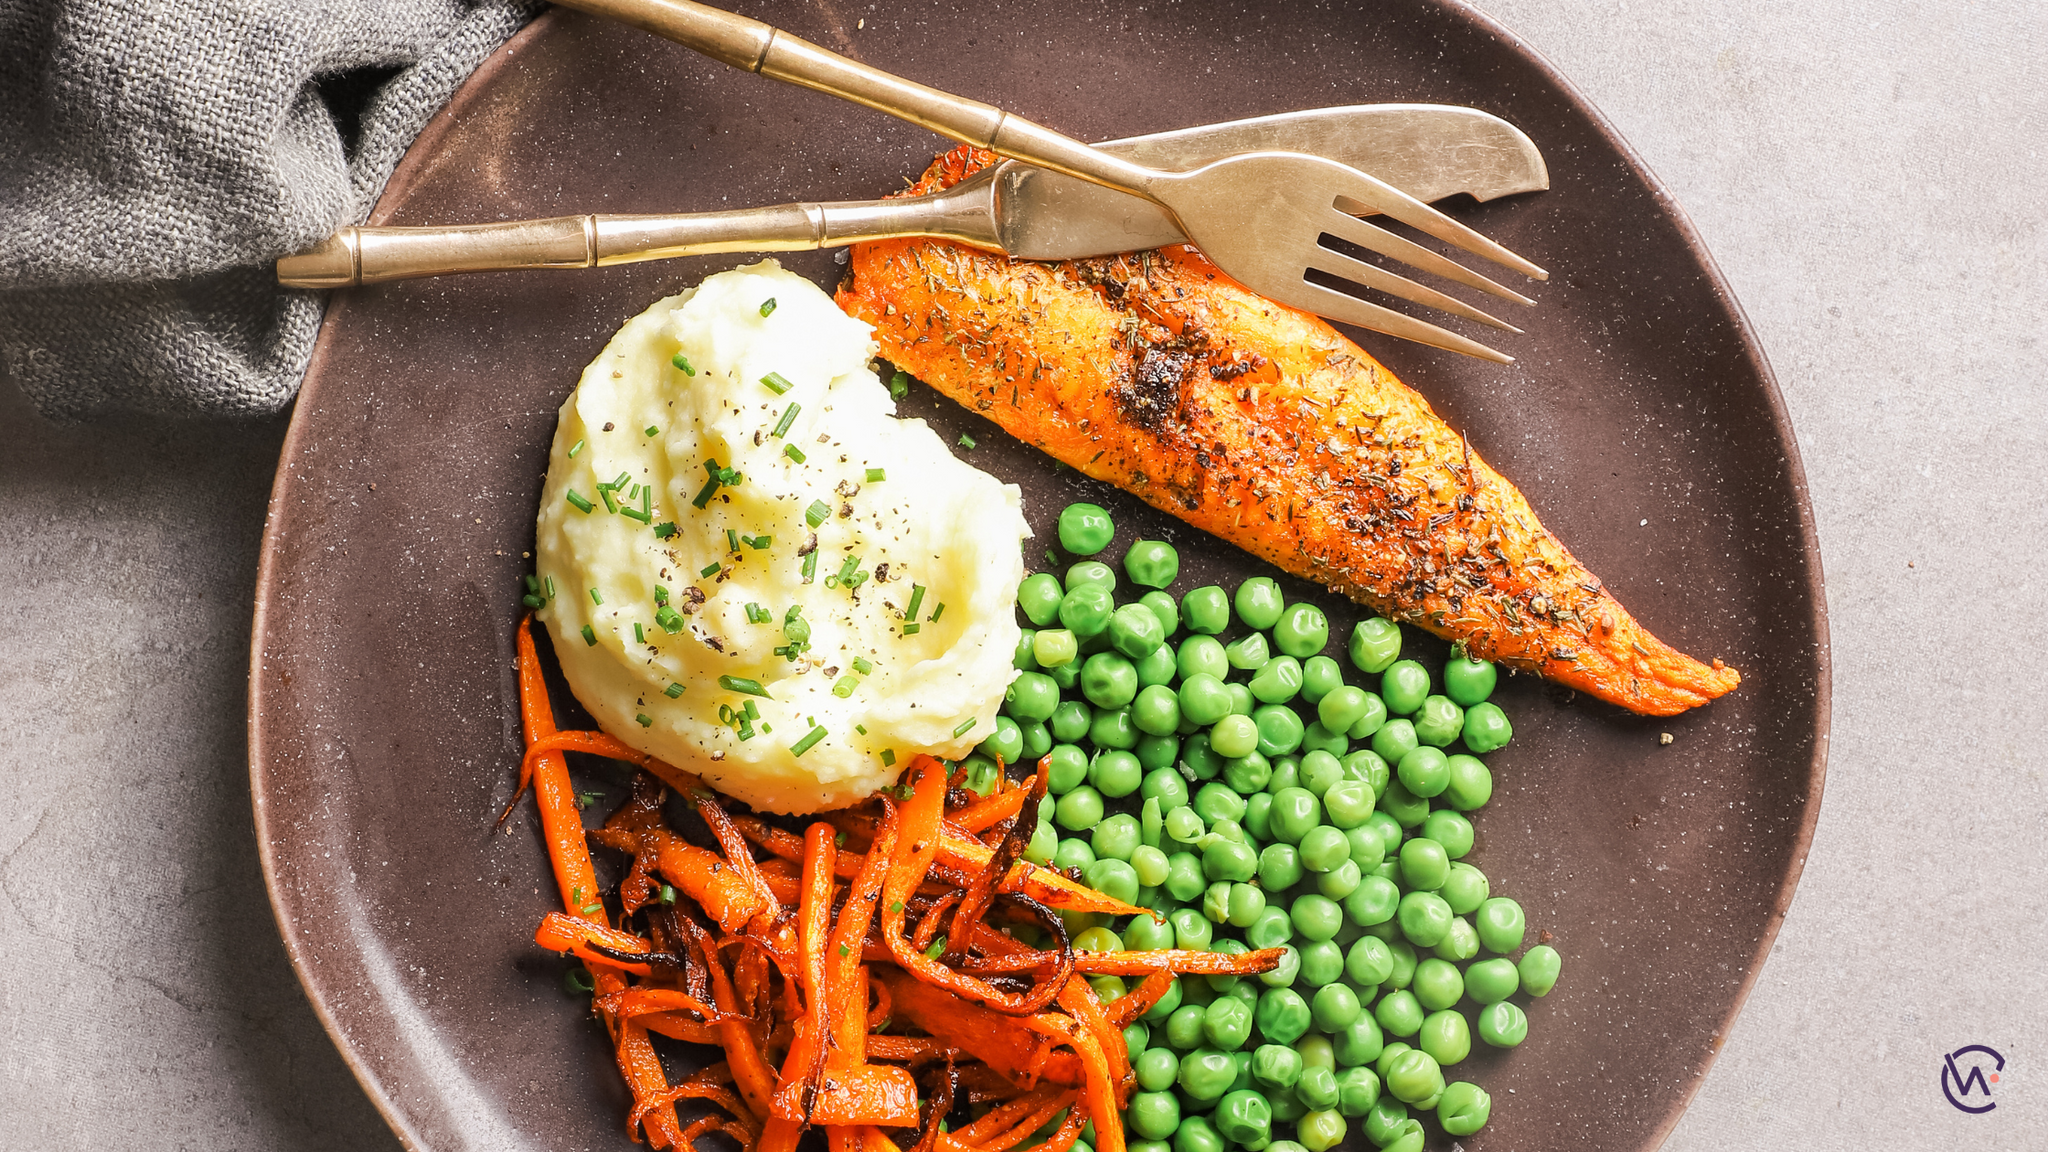 Chilli baked cod with garlic mashed potatoes, sautéed carrots & peas